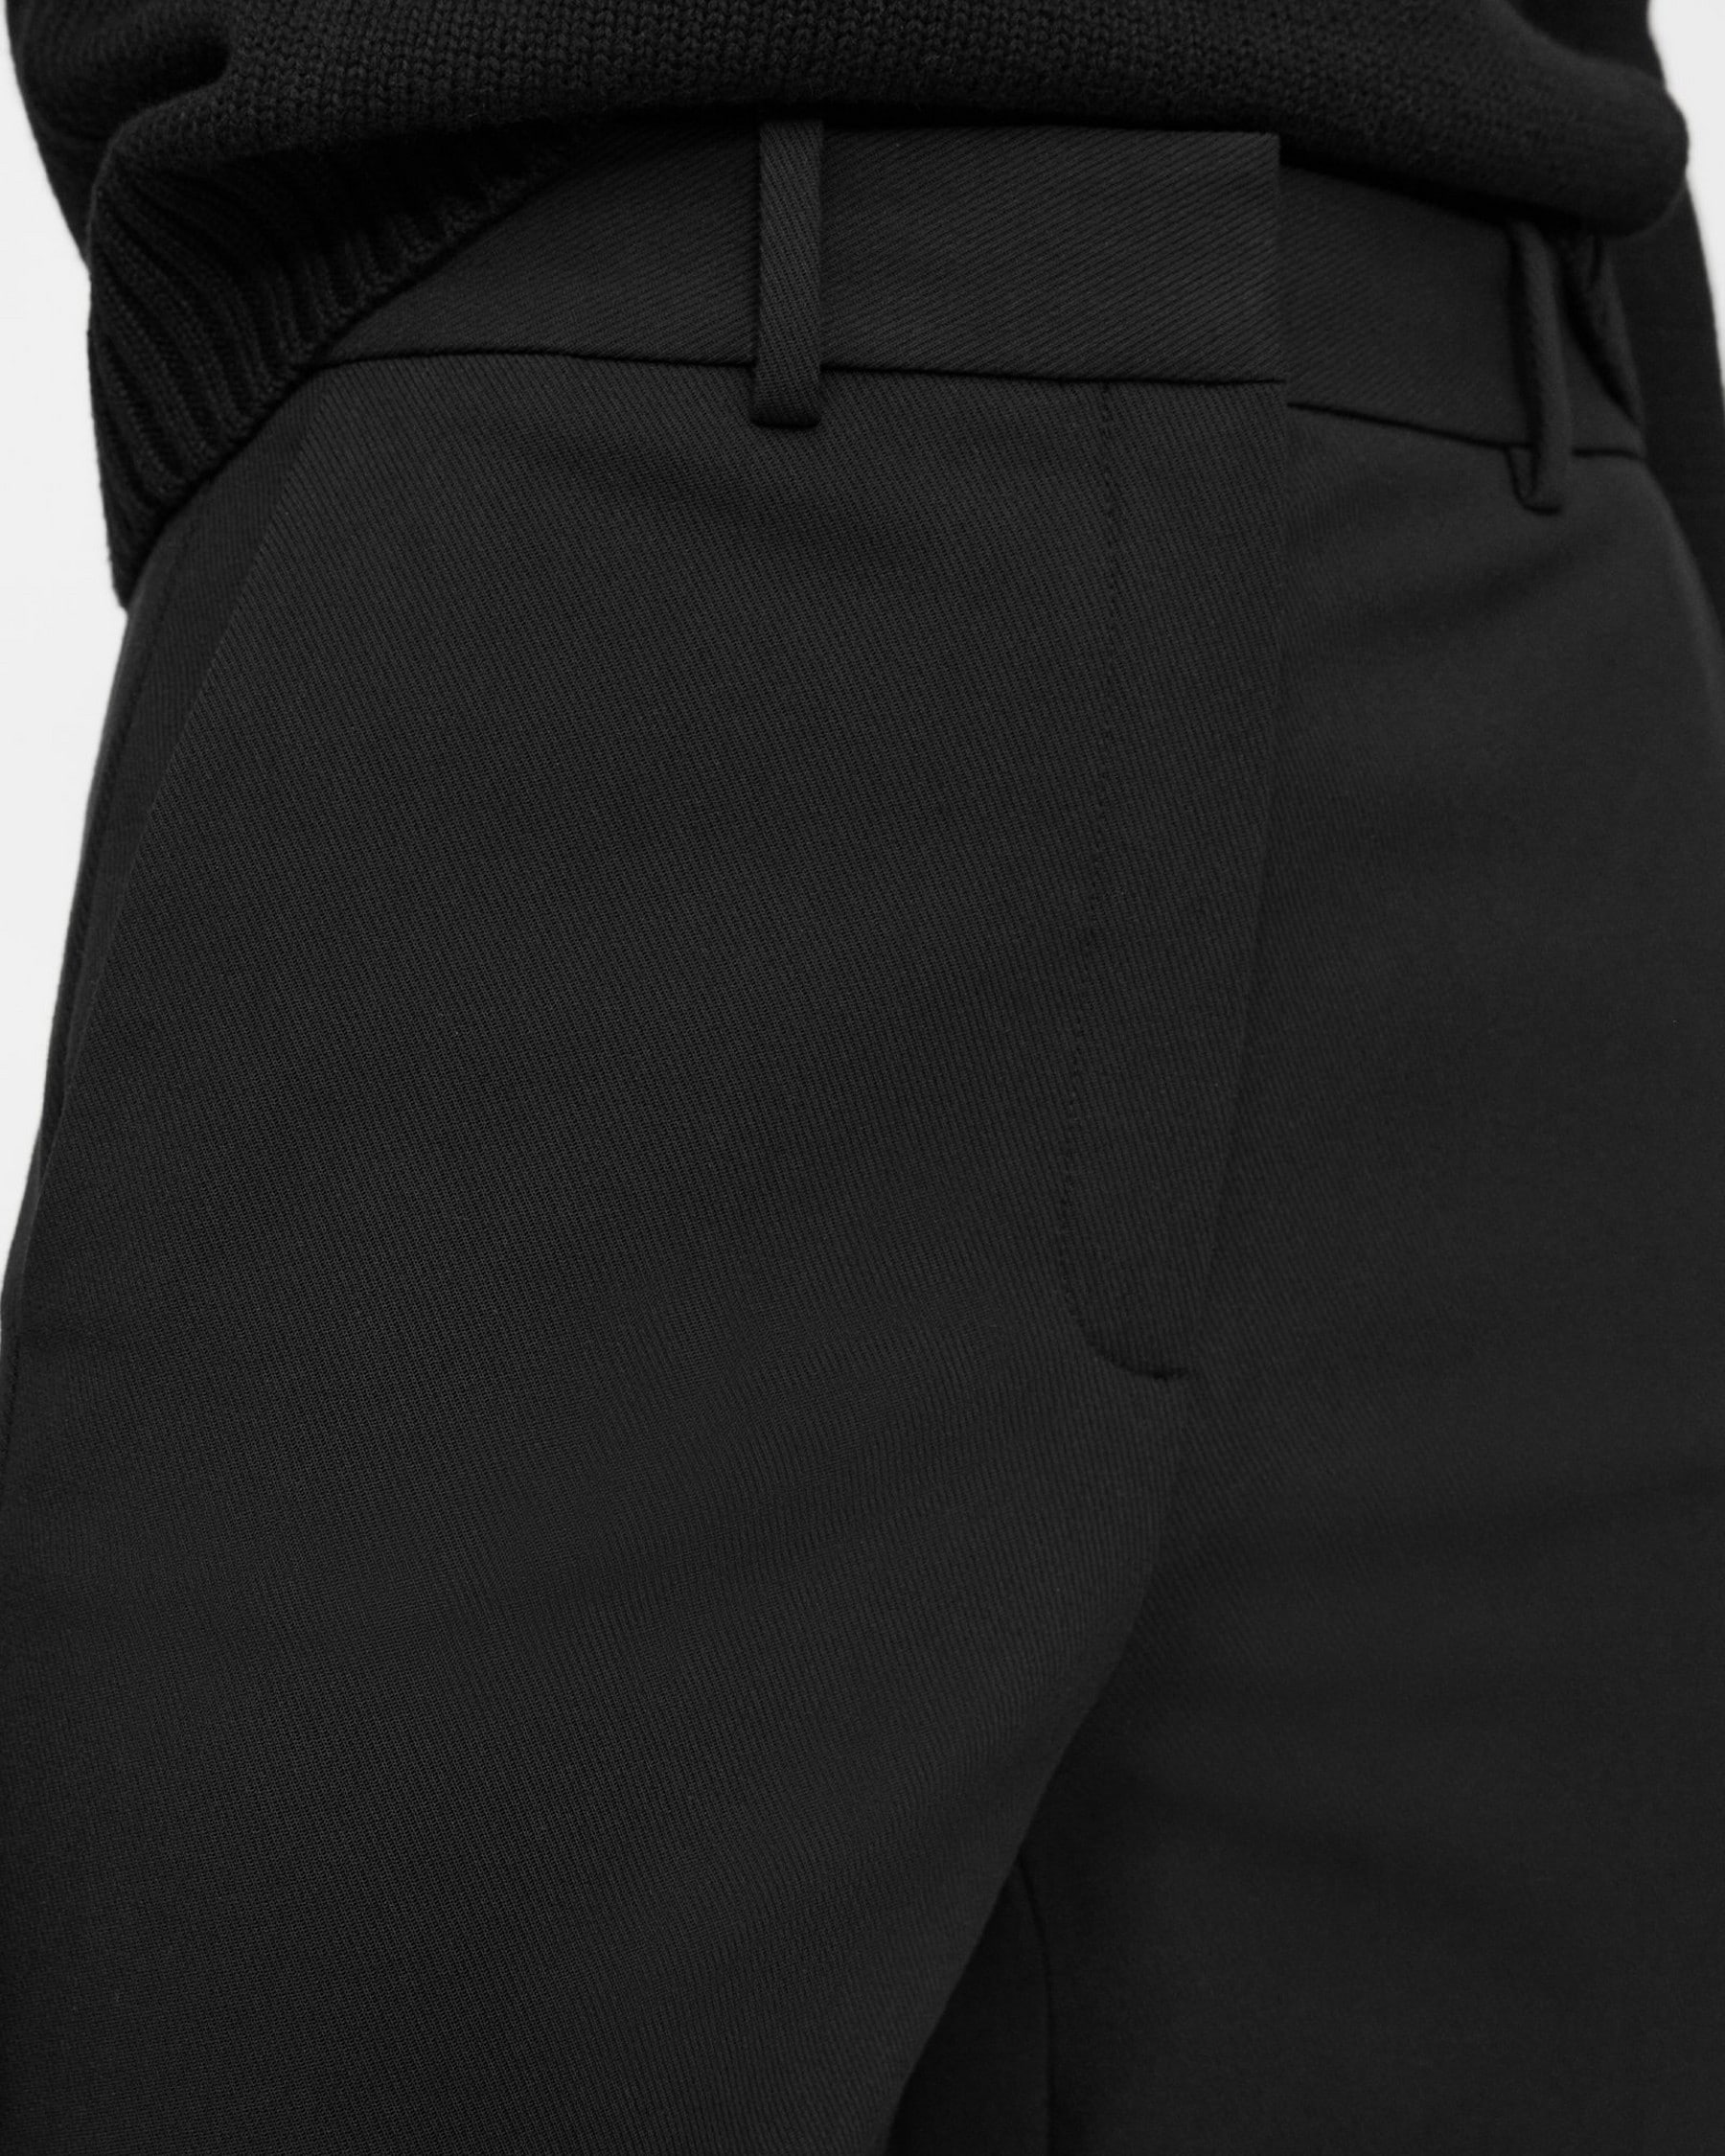 High-Waist Straight-Leg Pant in Neoteric Twill